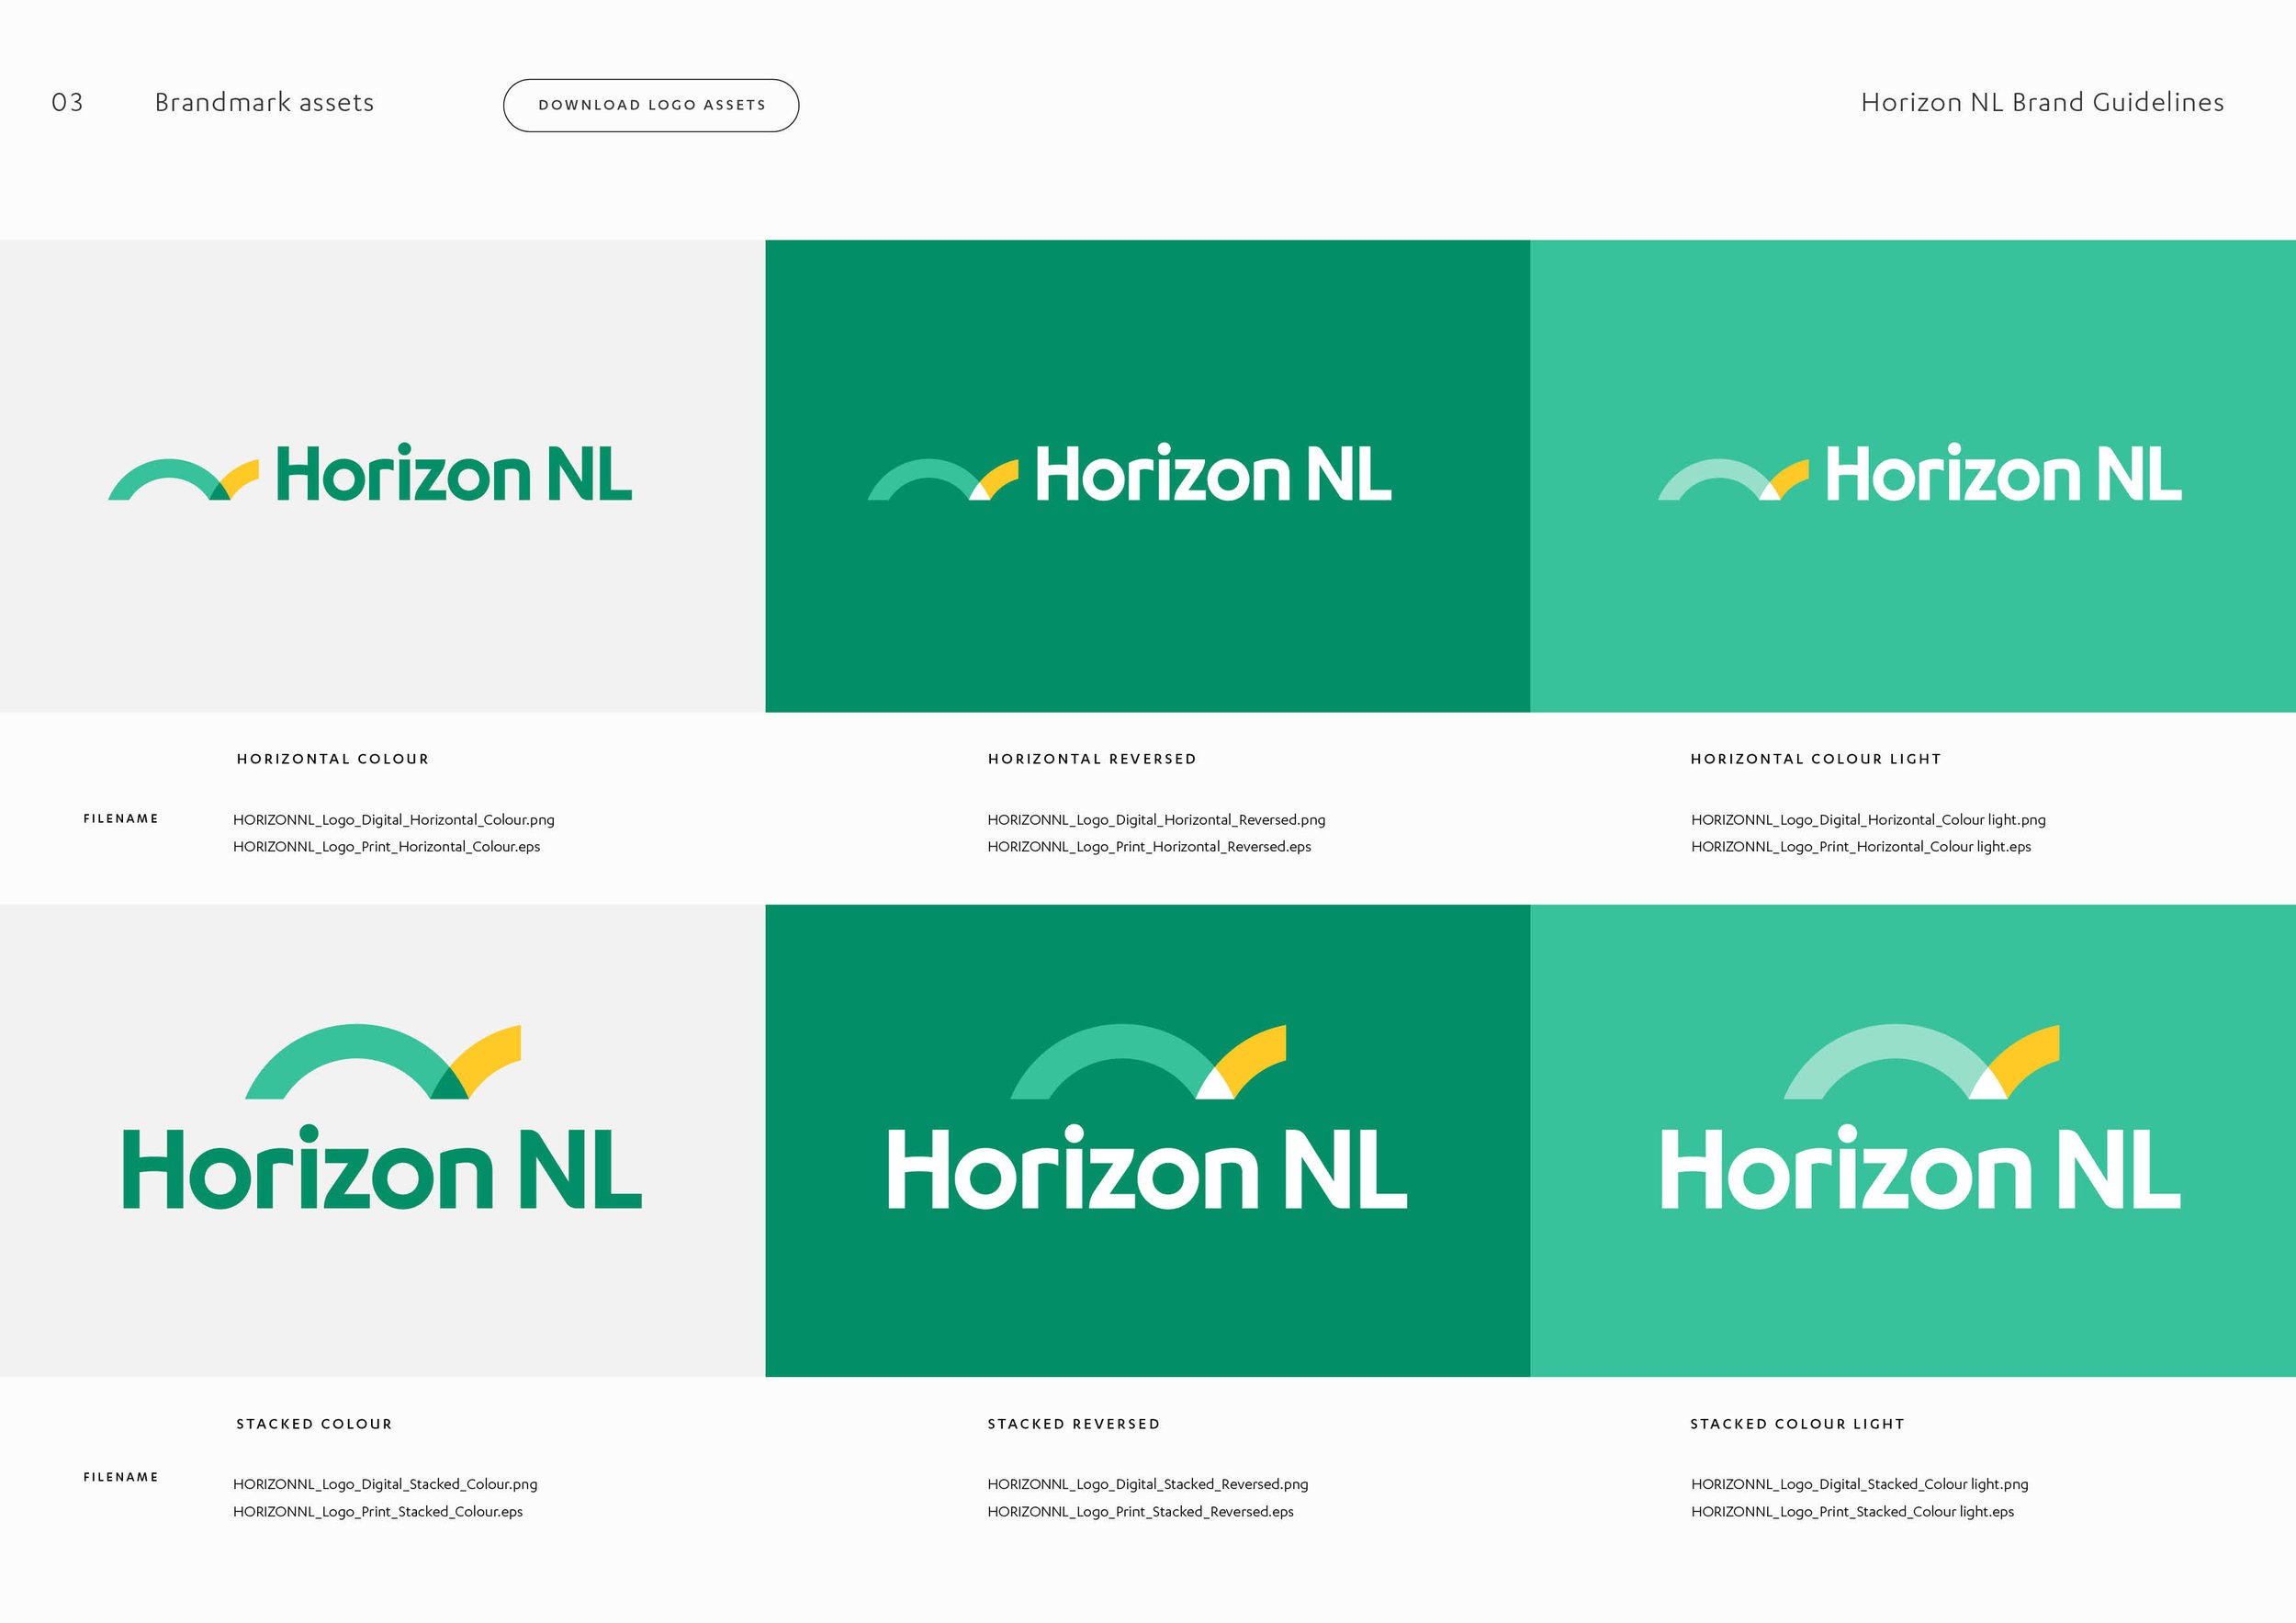 Horizon NL brand guidelines brandmark and colours page